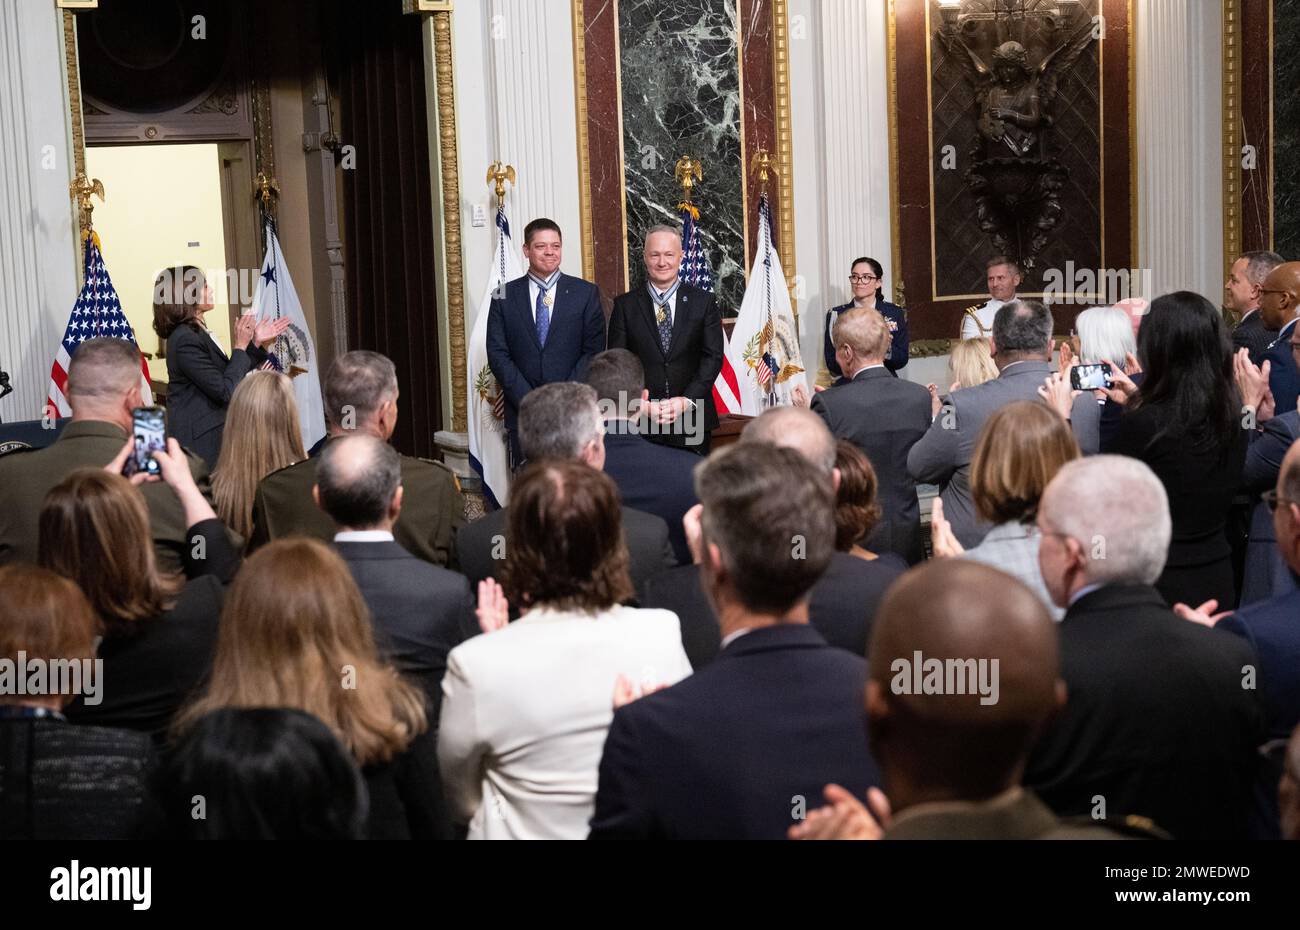 Washington, United States of America. 31 January, 2023. U.S Vice President Kamala Harris, left, applauds former NASA astronaut Douglas Hurley, right, and Robert Behnken, left, after awarding them the Congressional Space Medal of Honor during a ceremony in the Indian Treaty Room of the Eisenhower Executive Office Building at the White House, January 31, 2023 in Washington, DC Hurley and Behnken were awarded the medal for bravery in the NASA SpaceX Demonstration Mission-2 to the International Space Station. Credit: Joel Kowsky/NASA/Alamy Live News Stock Photo